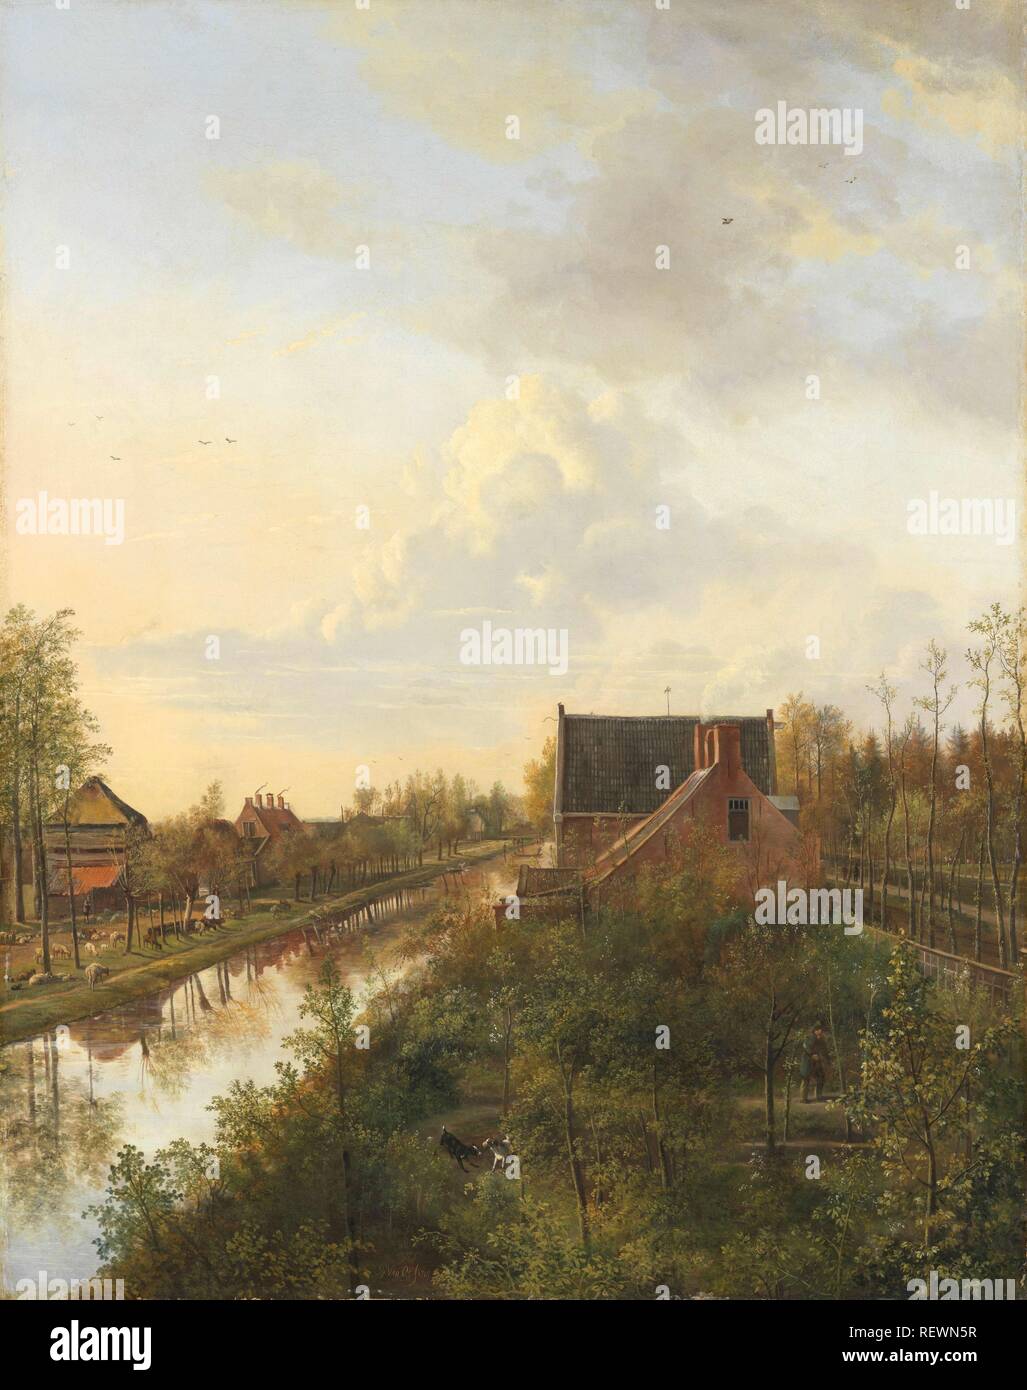 The Canal at 's-Graveland. The Watercourse near 's-Graveland. Dating: 1818. Measurements: h 111.5 cm × w 89.5 cm. Museum: Rijksmuseum, Amsterdam. Author: Pieter Gerardus van Os (mentioned on object). Stock Photo